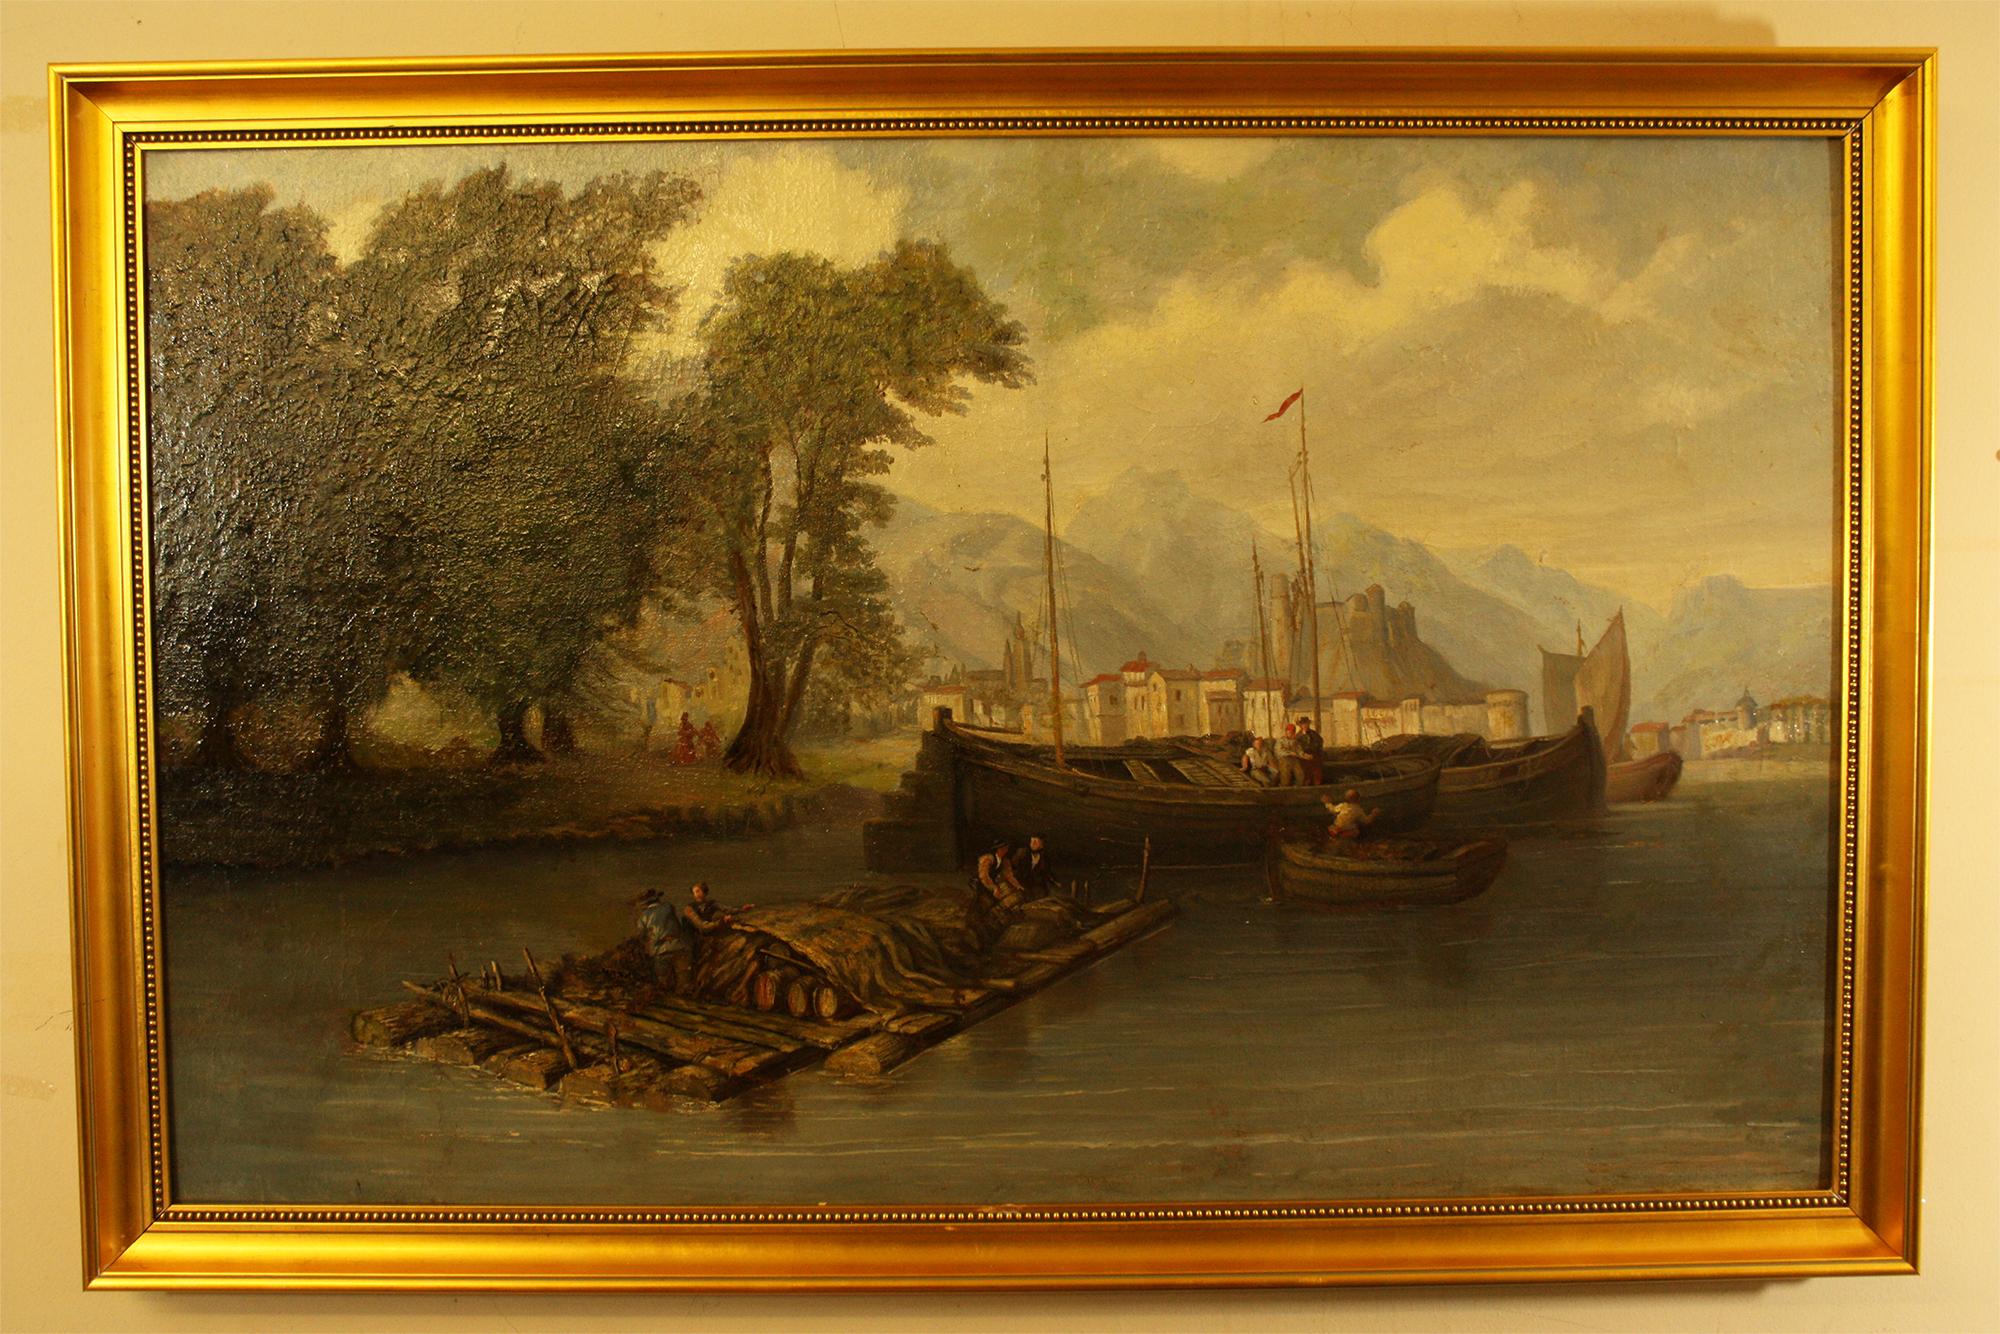 Venetian River Scene 18th Century Italian School  Oil on Canvas Unknown Artist
Painting has been reframed and some retouching, Ready to hang on the wall, good conversation piece
Please let me quote you for packing and shipping